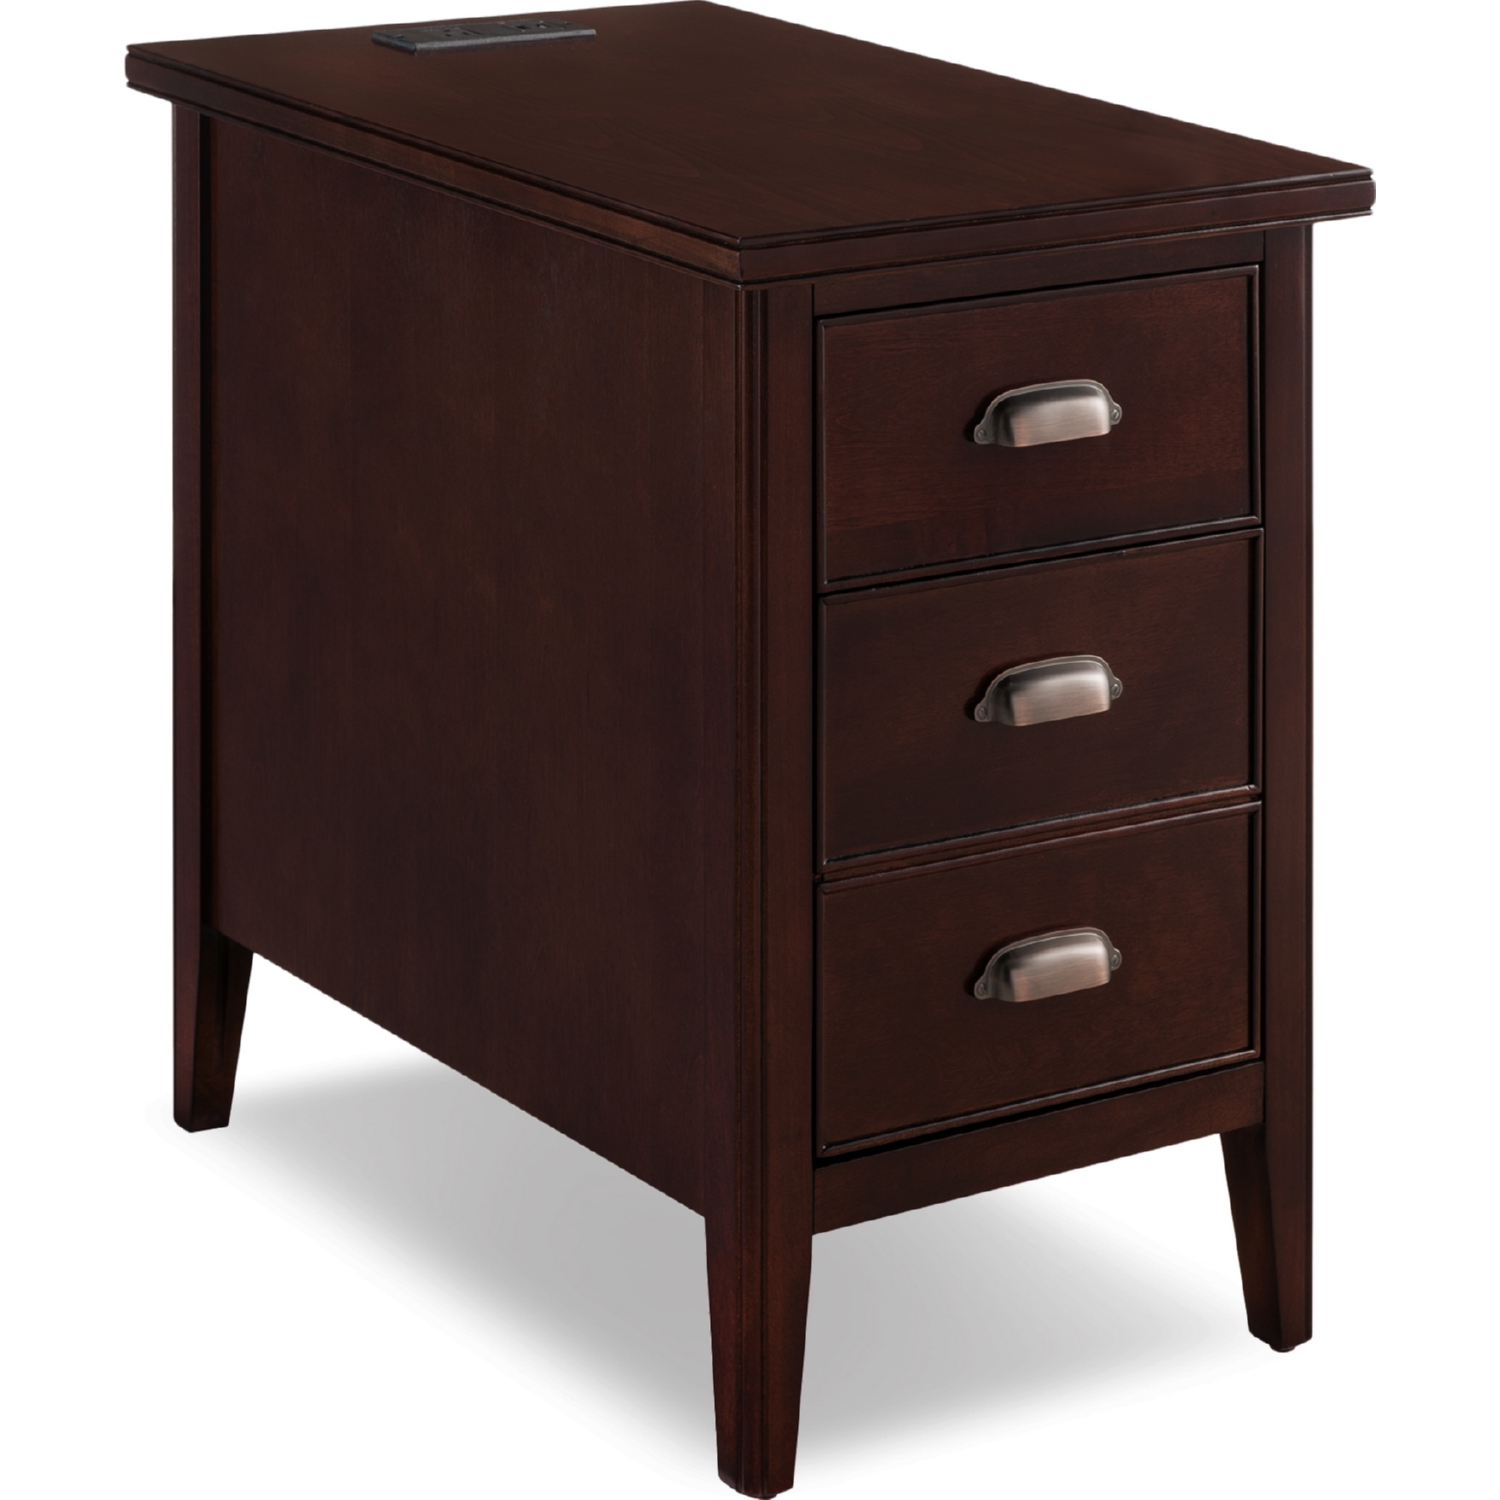 leick laurent cabinet end table drawer door plug with and chocolate cherry quality furniture houston french home accessories kmart tools cocktail marble top big lots wall art the